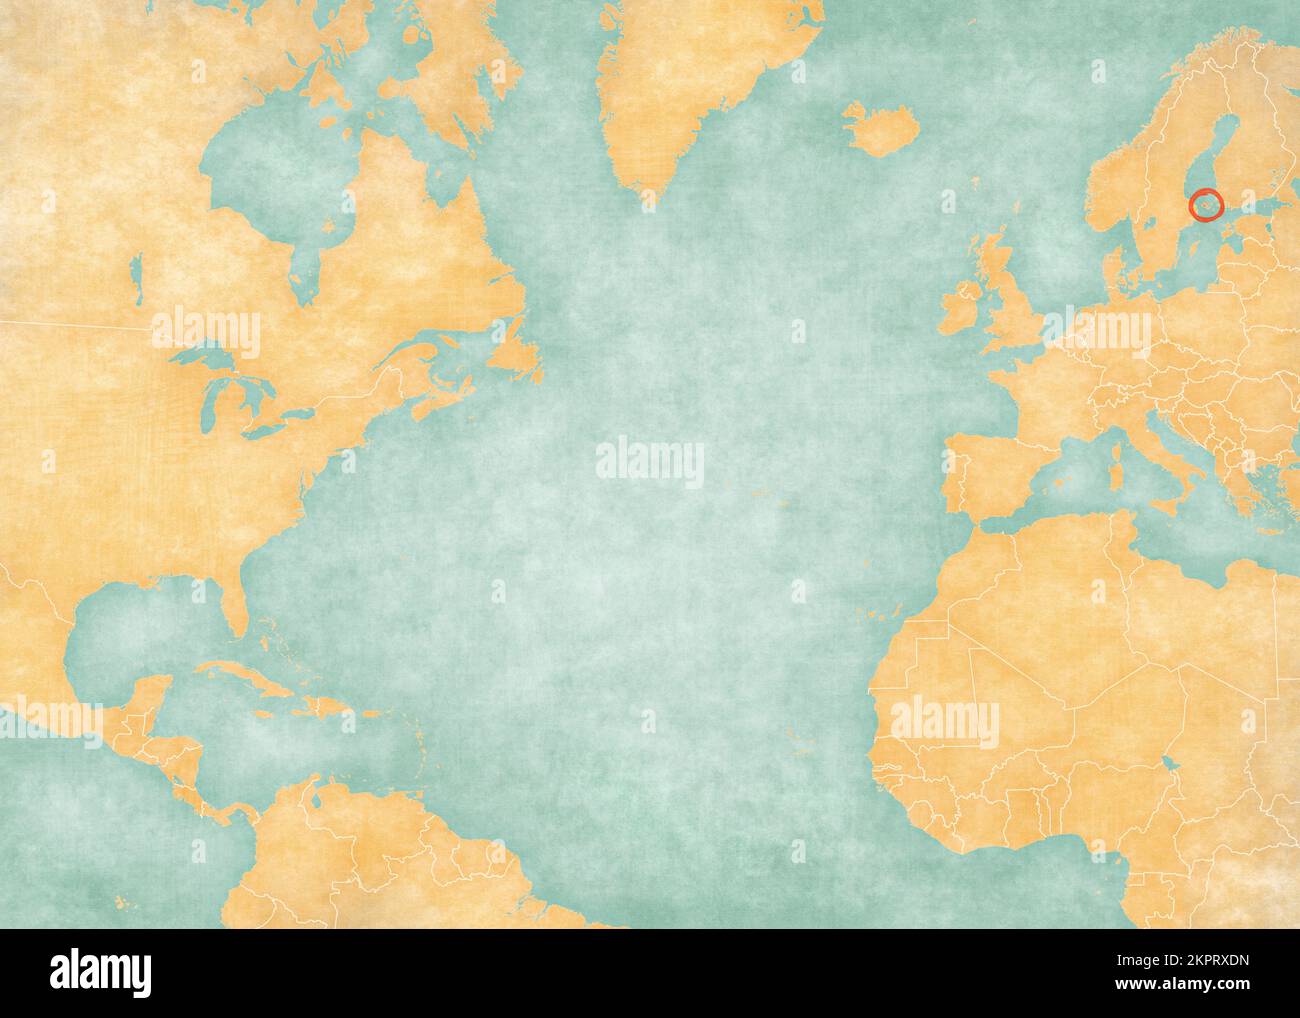 Aland Islands on the map of North Atlantic Ocean in soft grunge and vintage style, like old paper with watercolor painting. Stock Photo